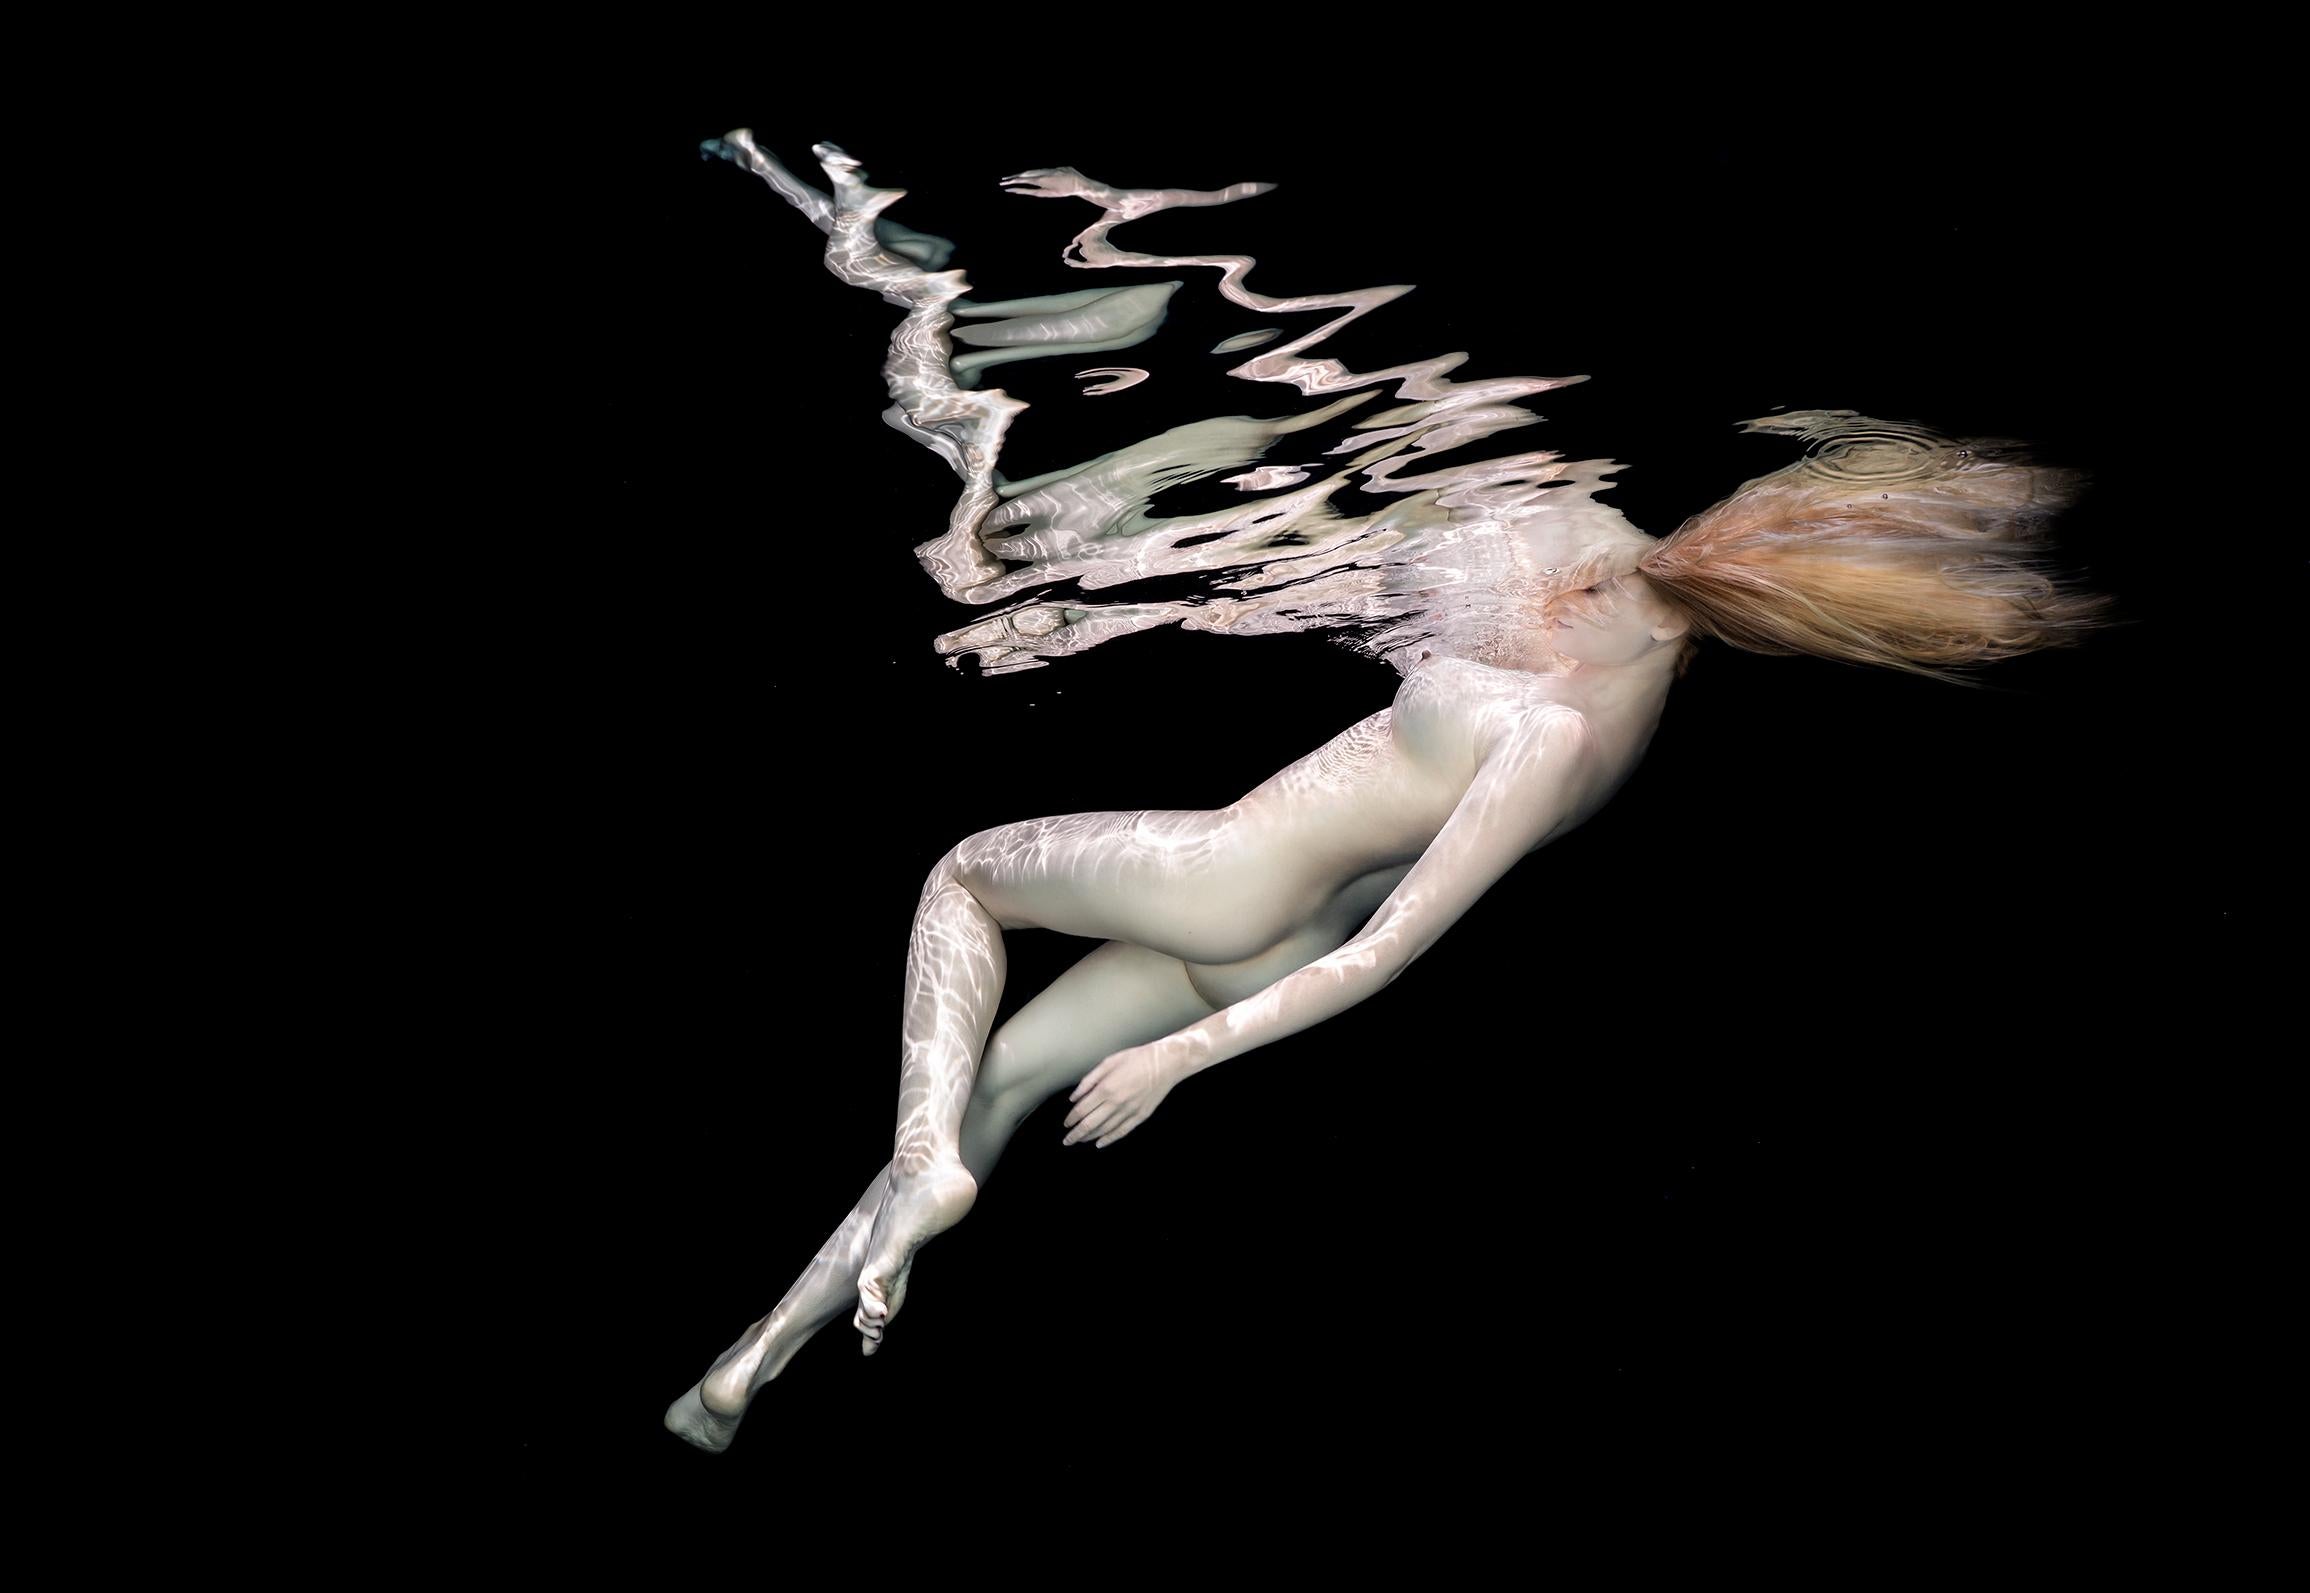 Alex Sher Nude Photograph - Porcelain III - underwater nude photograph - print on paper 23" x 35"